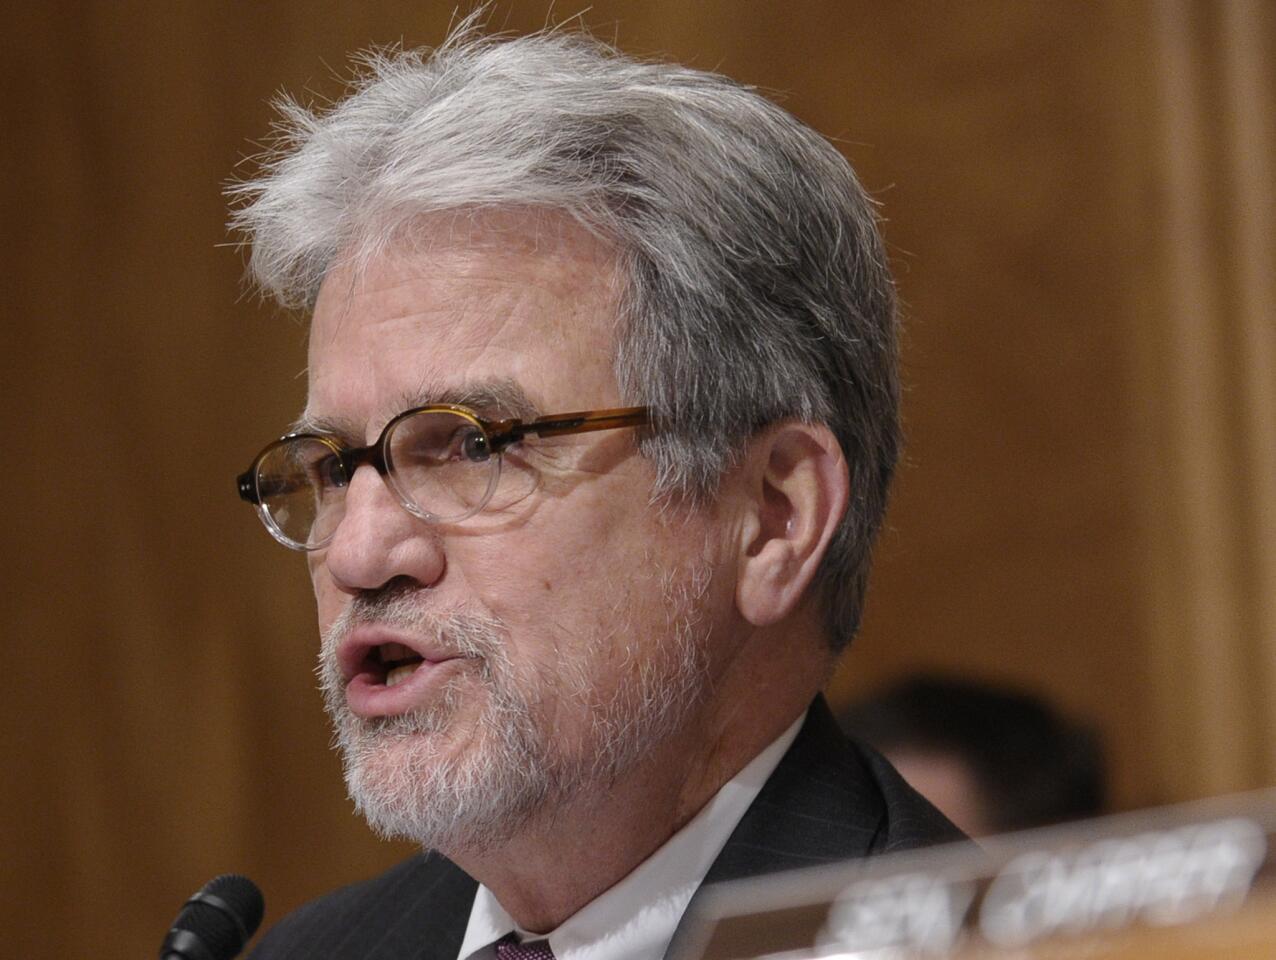 Sen. Tom Coburn (R-Okla.), a fiscal conservative who was first elected in 1995, said Jan. 16 that he will retire after 2014. Though he is battling prostate cancer, Coburn said in a statement that the decision "isn't about my health, my prognosis or even my hopes and desires."